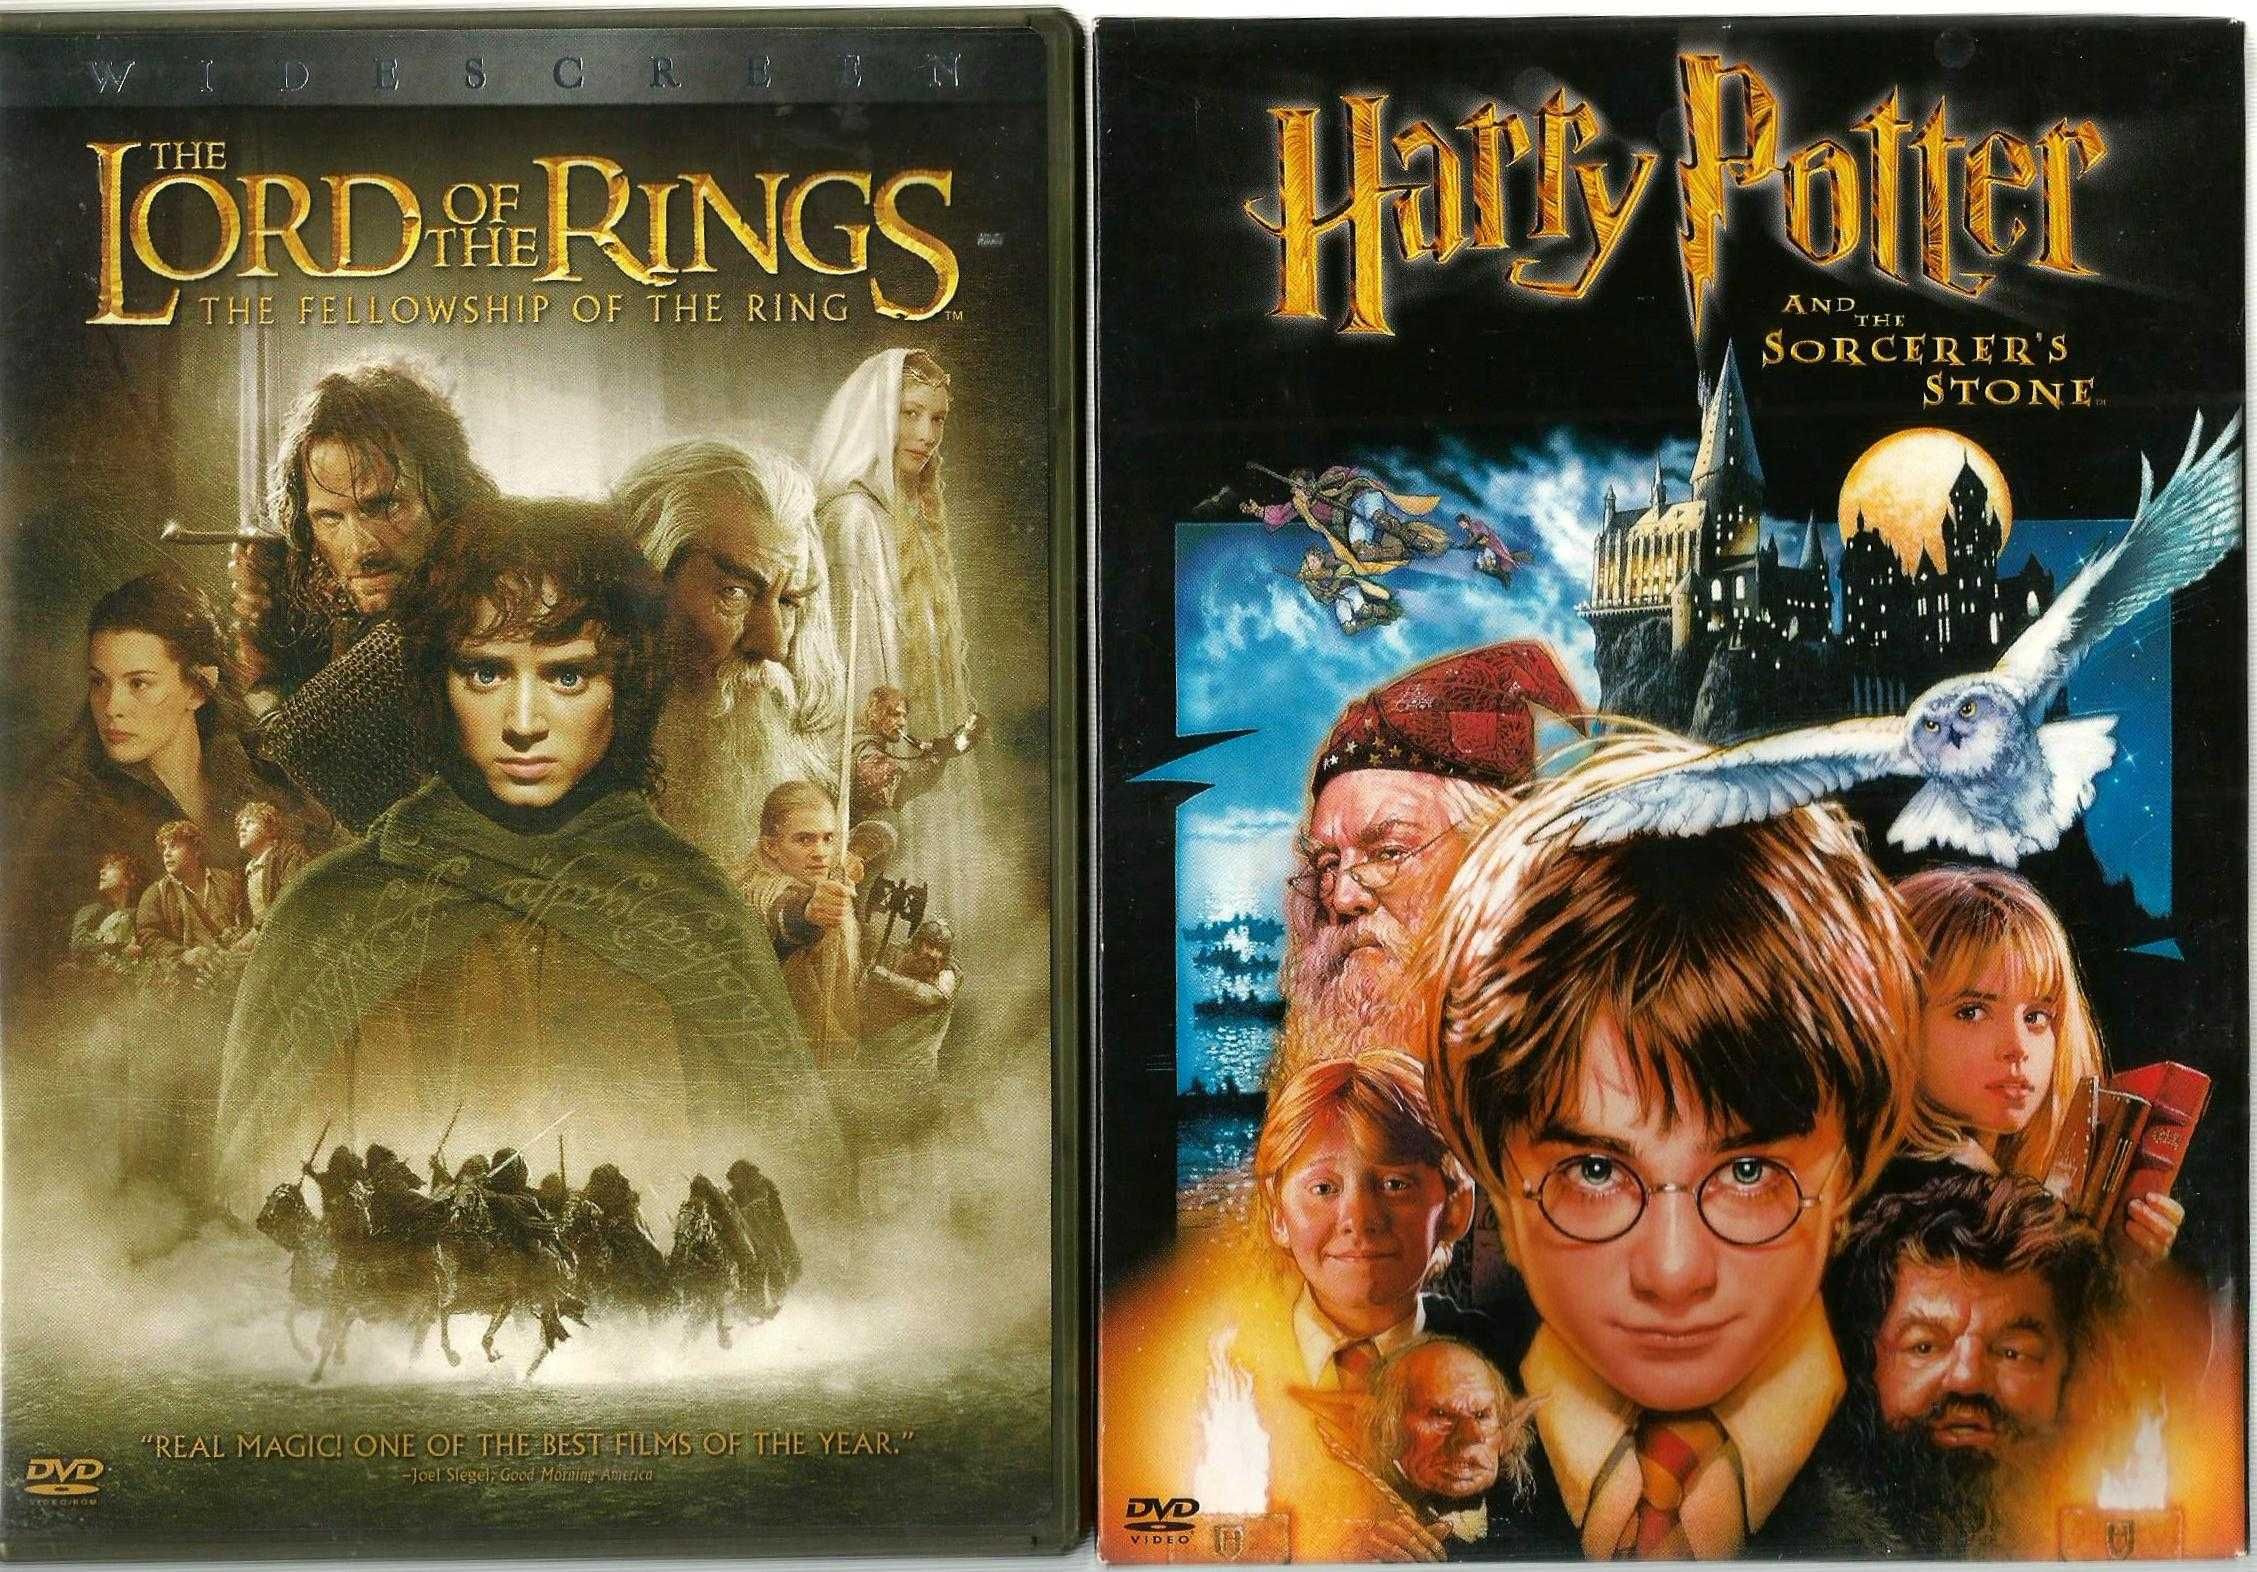 Harry Potter – The Lord of the Rings 4 DVD.